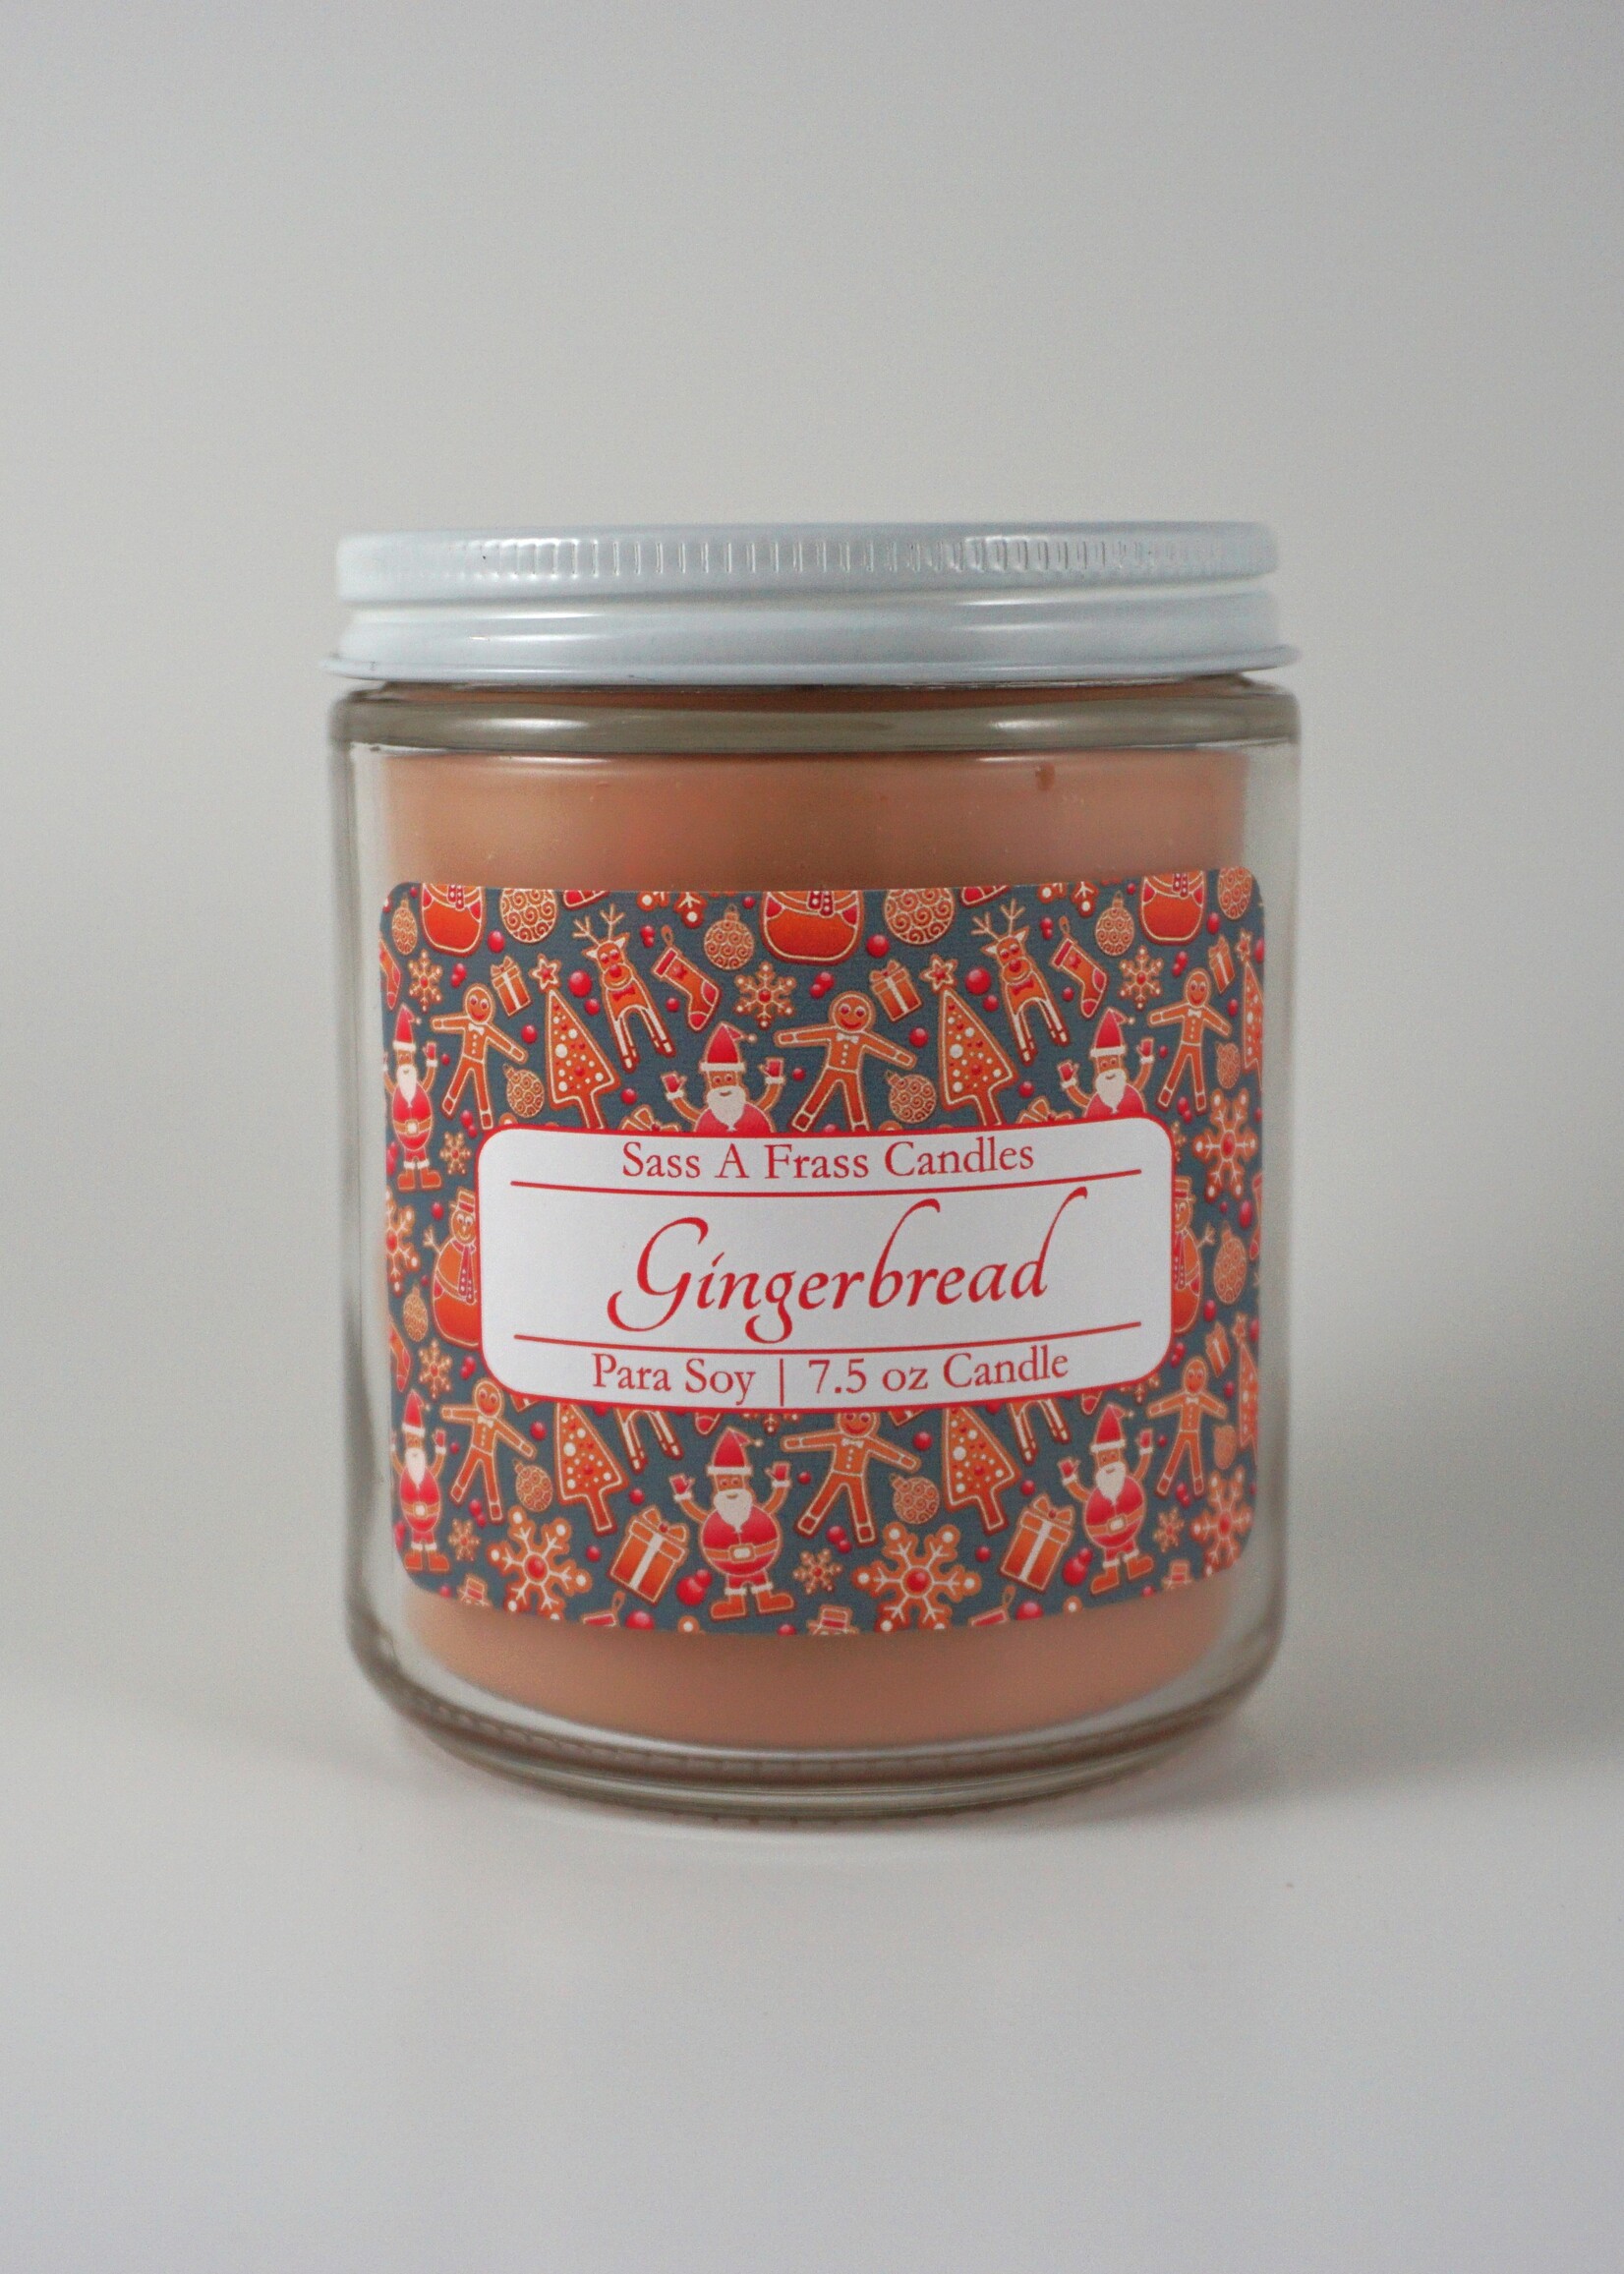 Gingerbread 7.5 oz Candle